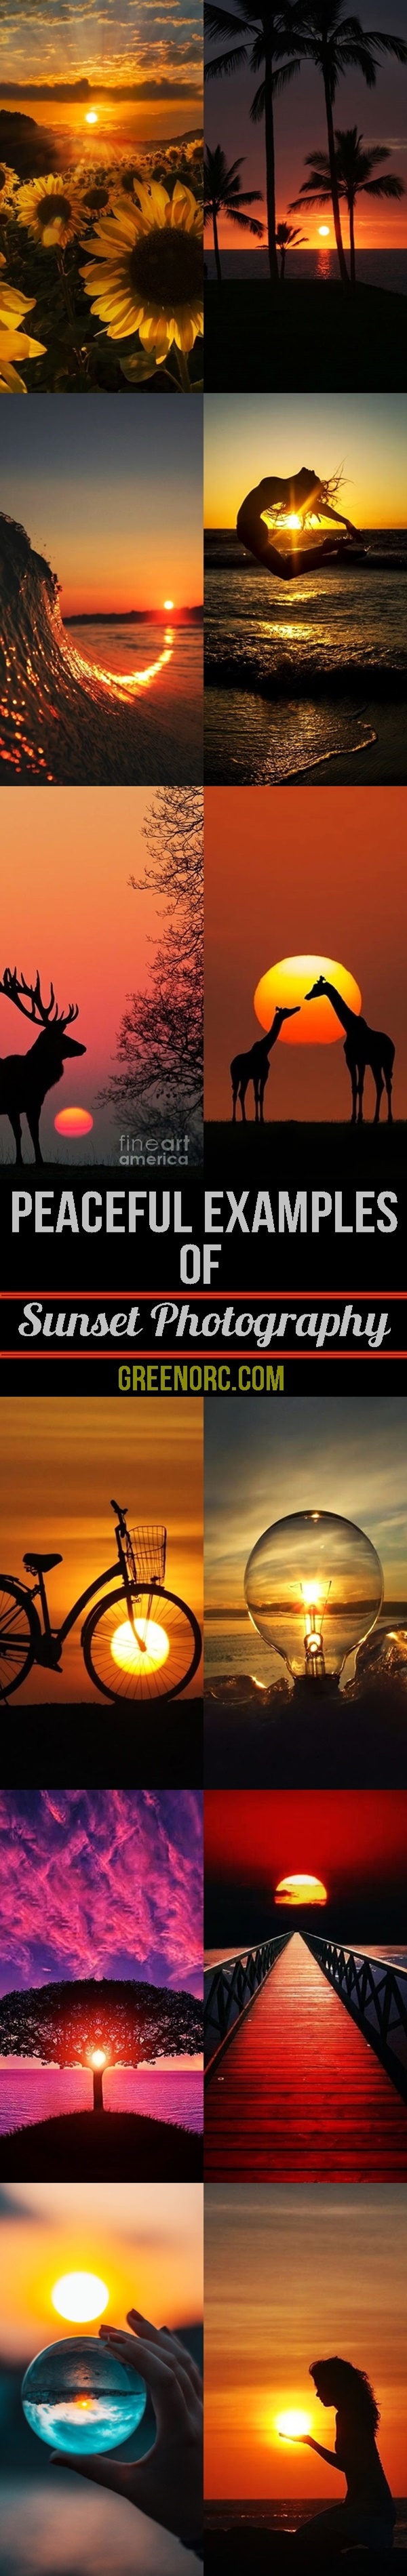 Peaceful Examples of Sunset Photography